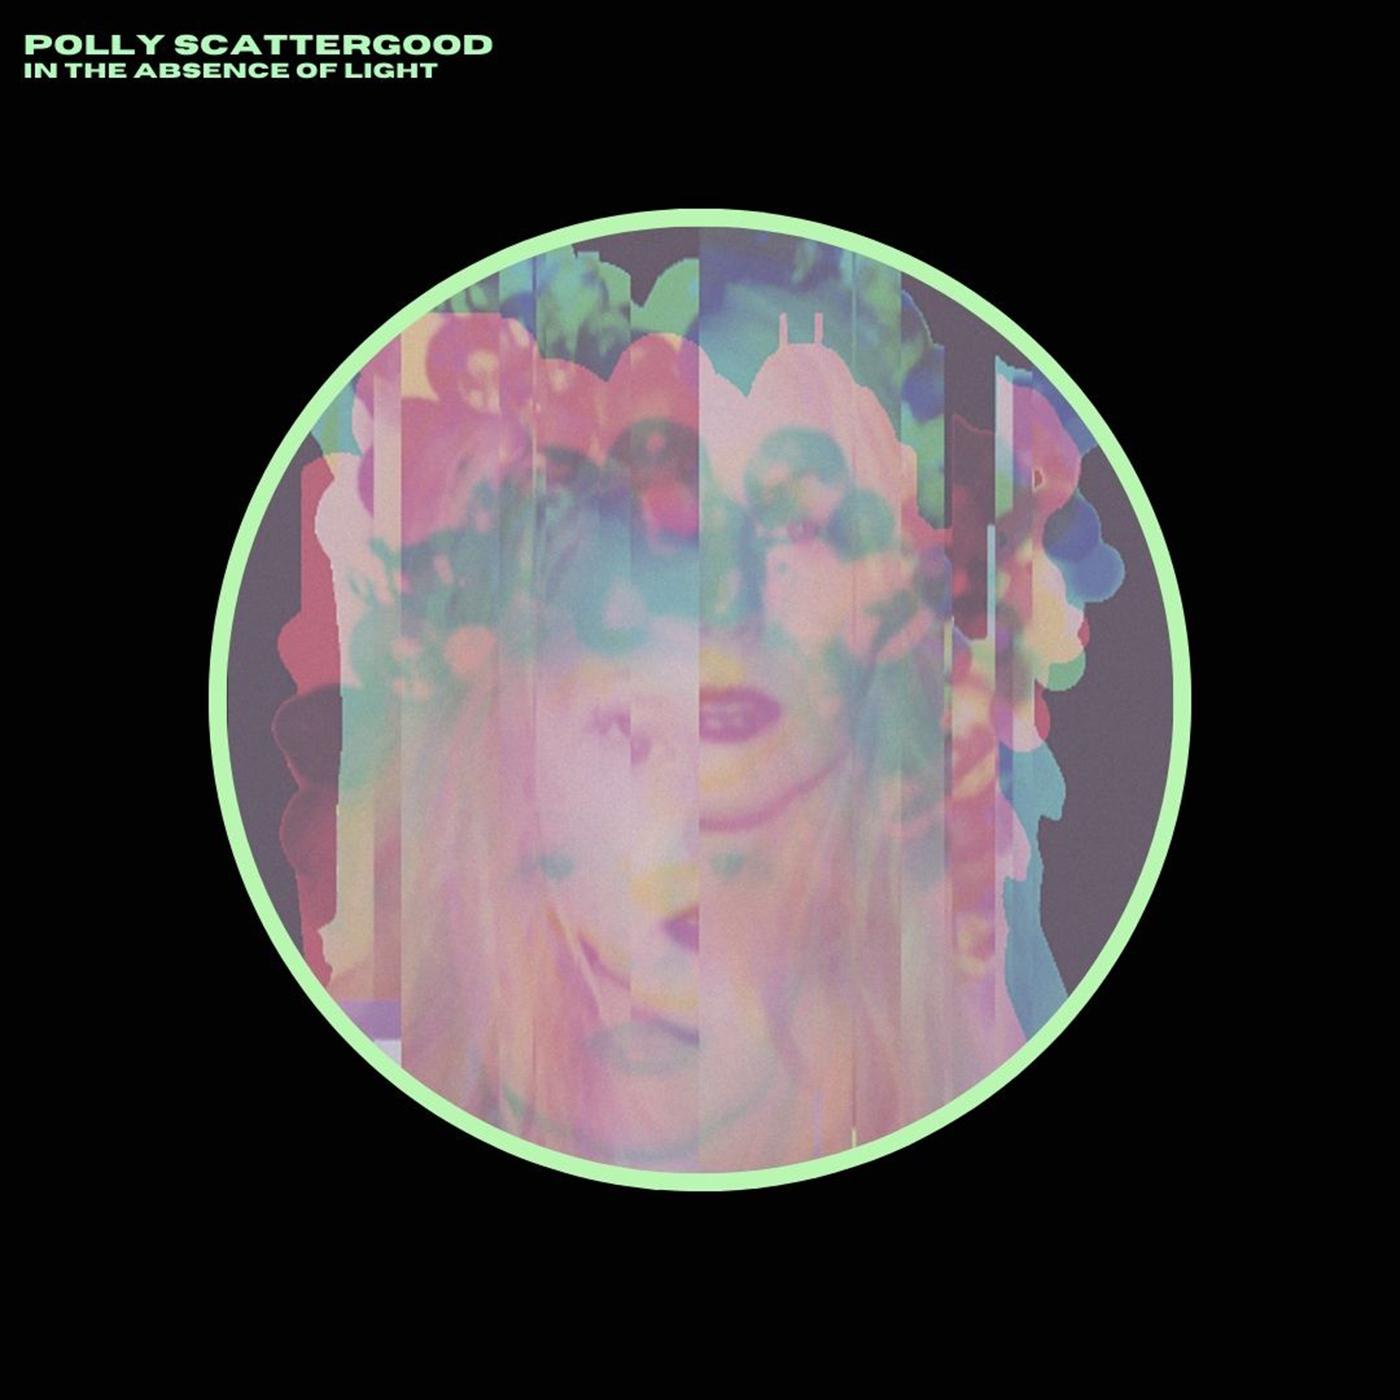 Polly Scattergood - Saturn 9